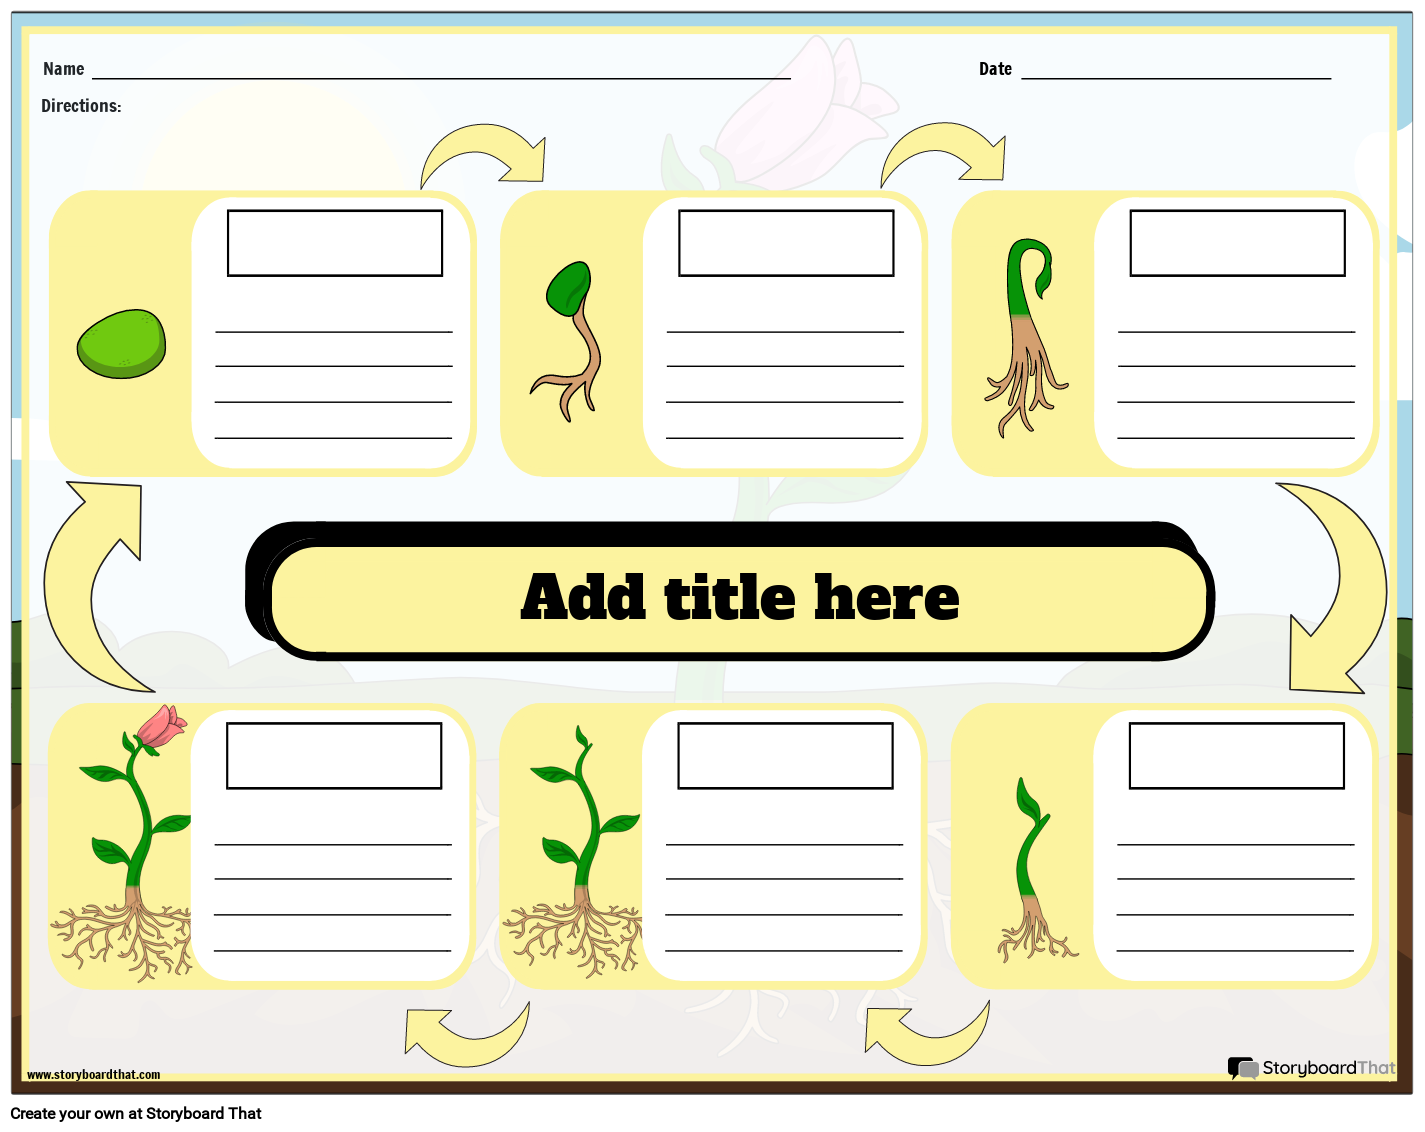 Life Cycle of a Plant Worksheet